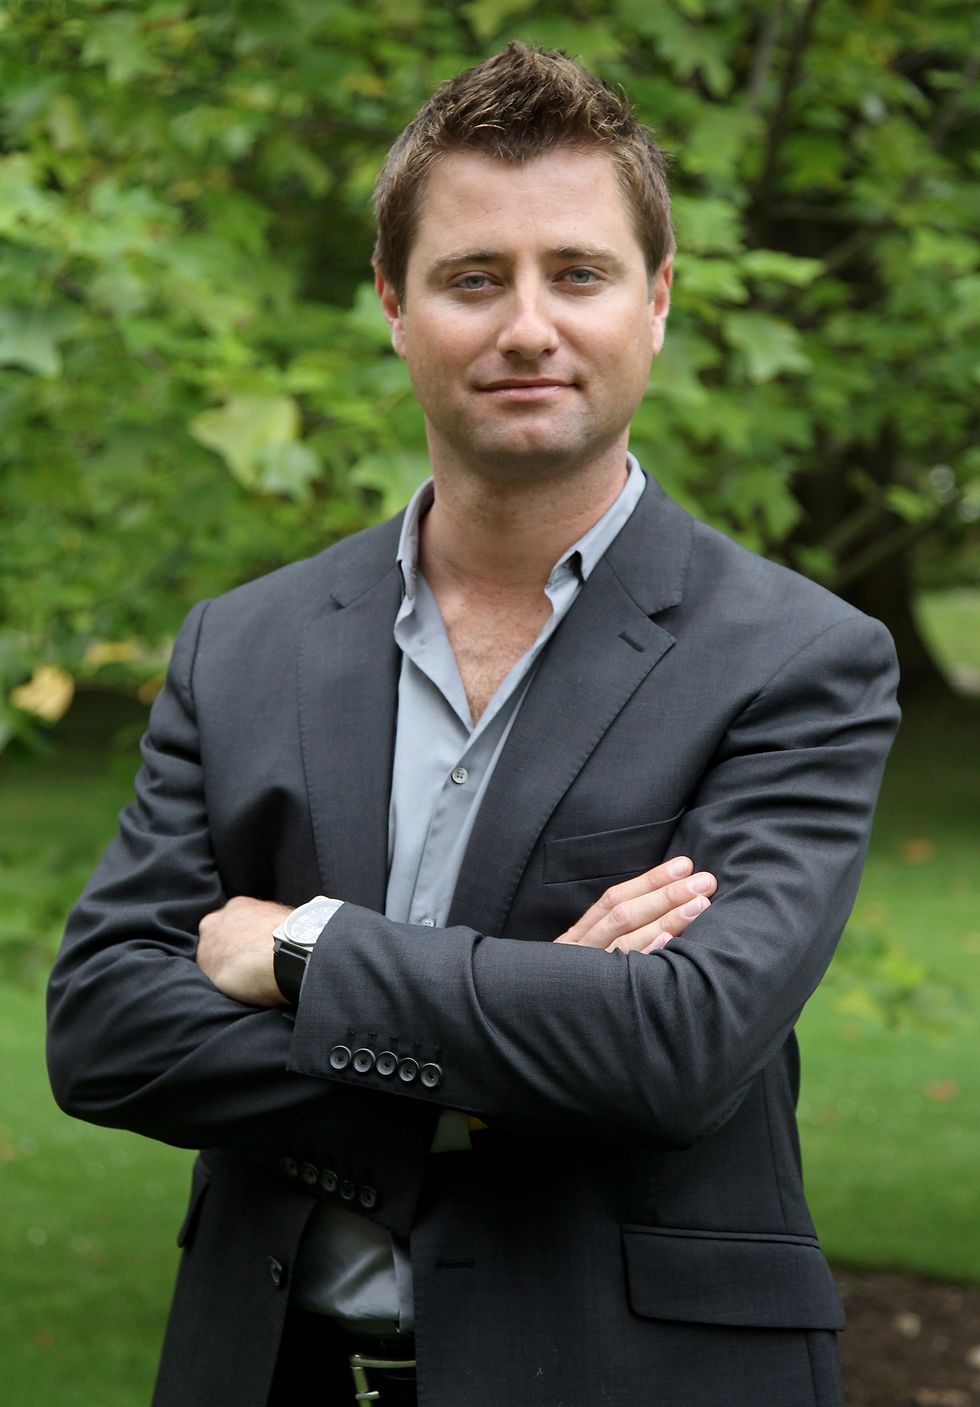 George Clarke poses in front of the B&Q Sheep's Wool Insulation Installation at the launch of The Prince of Wales' a Garden Party to Make A Difference in the grounds of Clarence House on September 8, 2010 in London, England.